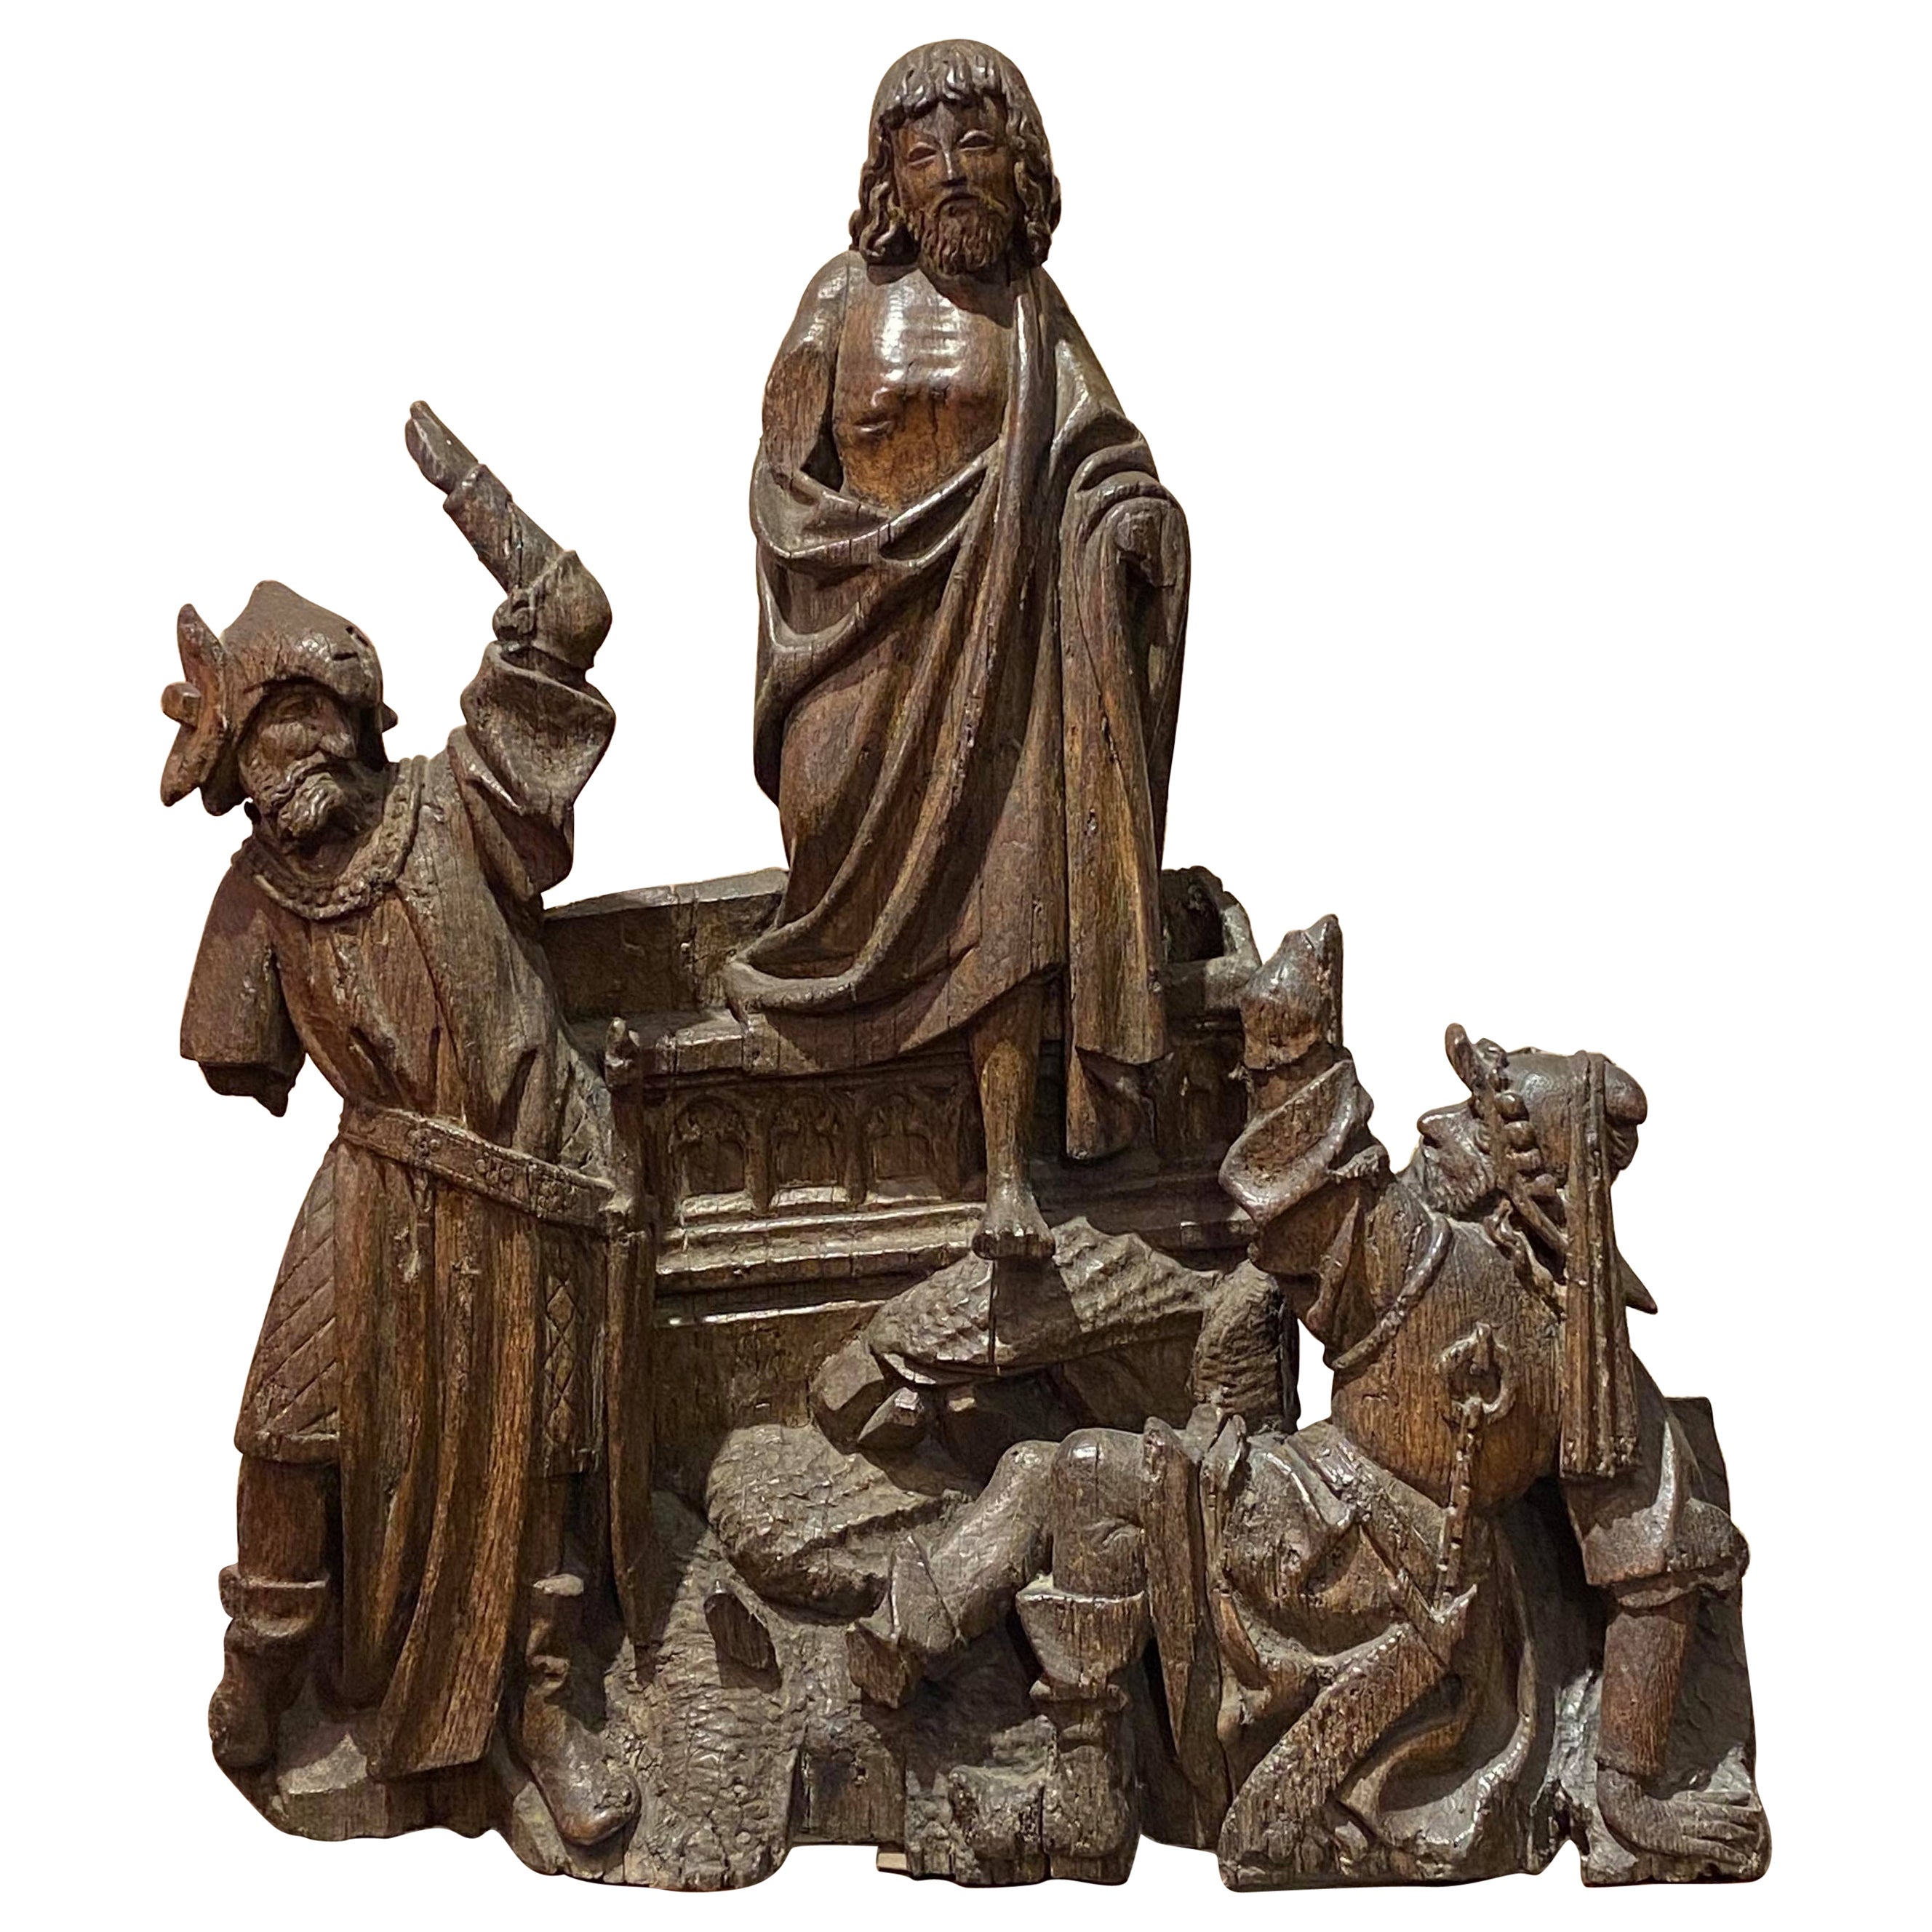 Carved Wood Depicting the Resurrection of Christ